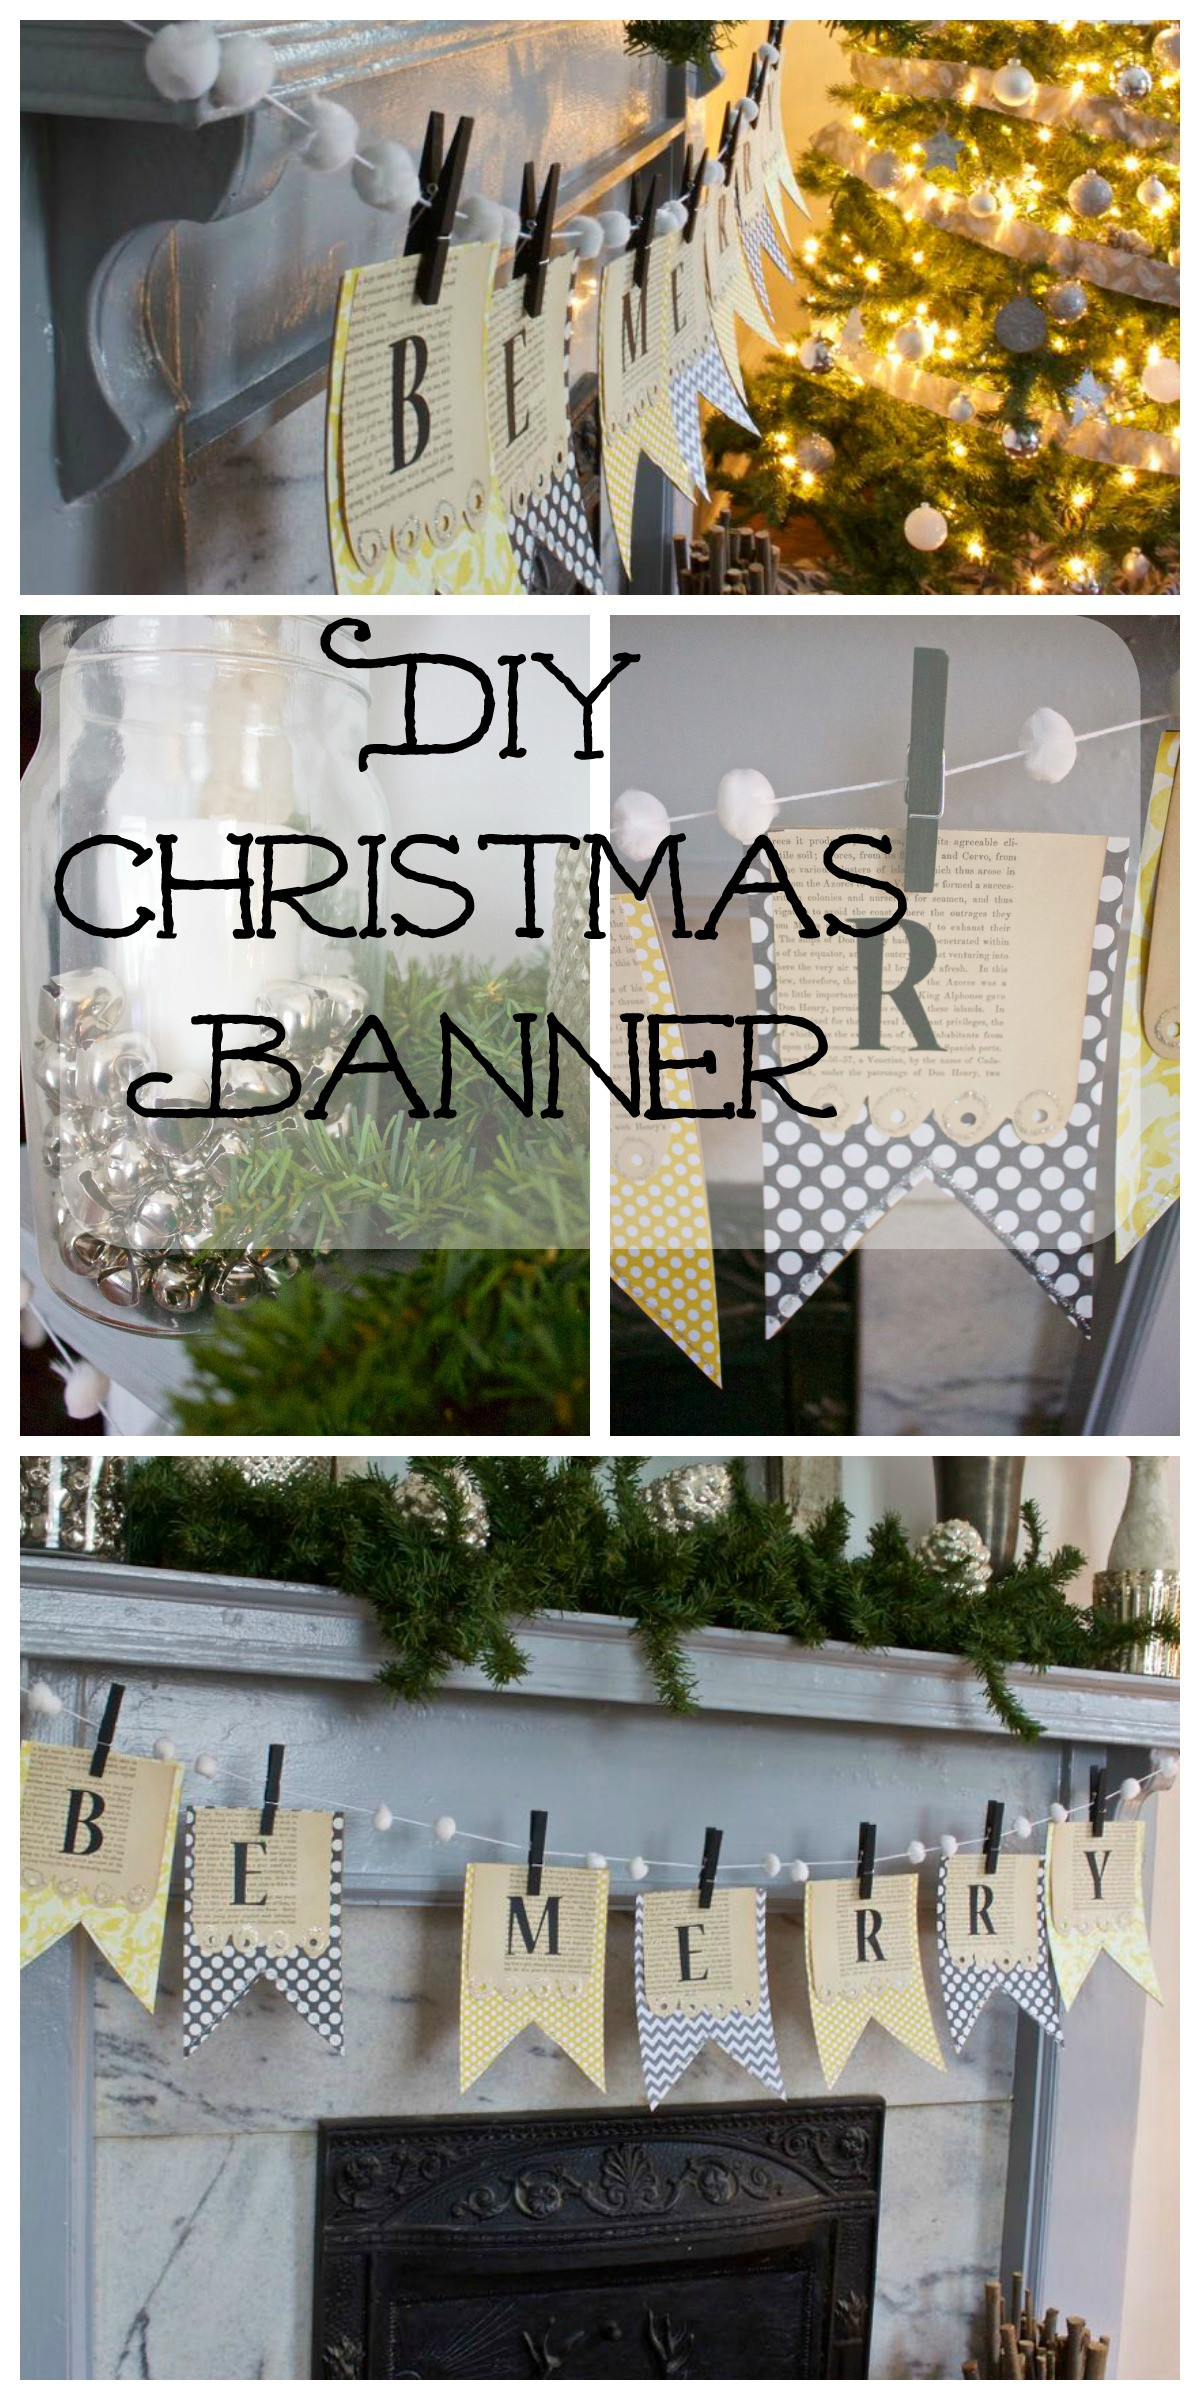 DIY Christmas Banner
 DIY Christmas Banner Be Merry 2 Bees in a Pod